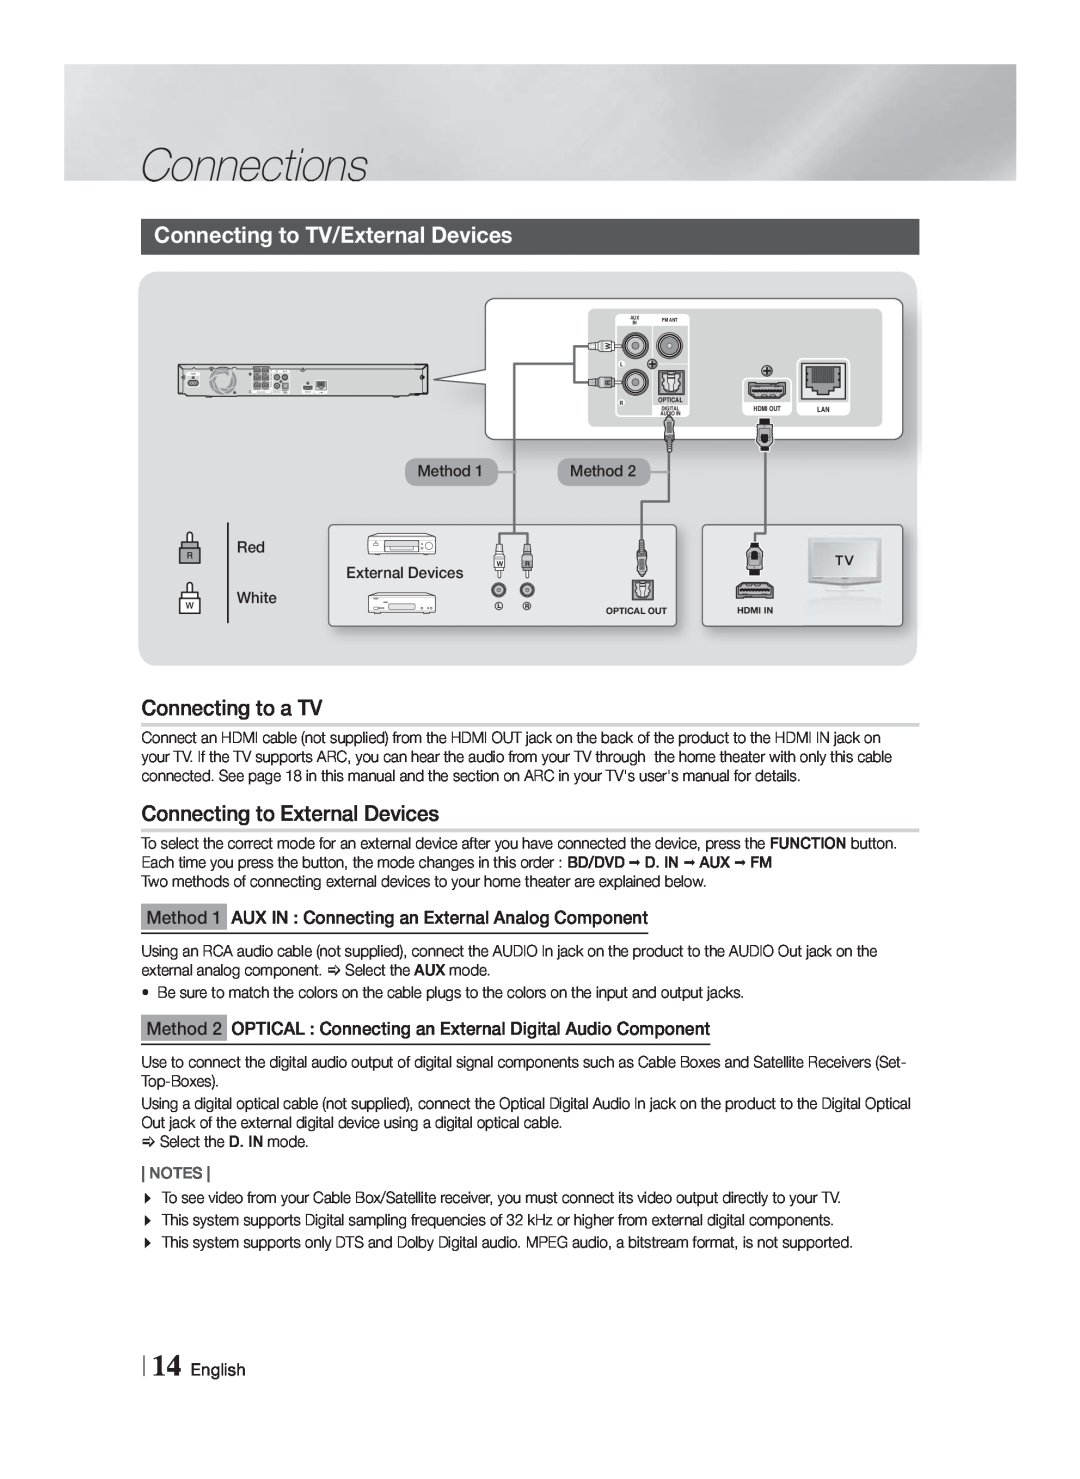 Samsung HTF4500ZA Connecting to TV/External Devices, Connecting to a TV, Connecting to External Devices, Connections 